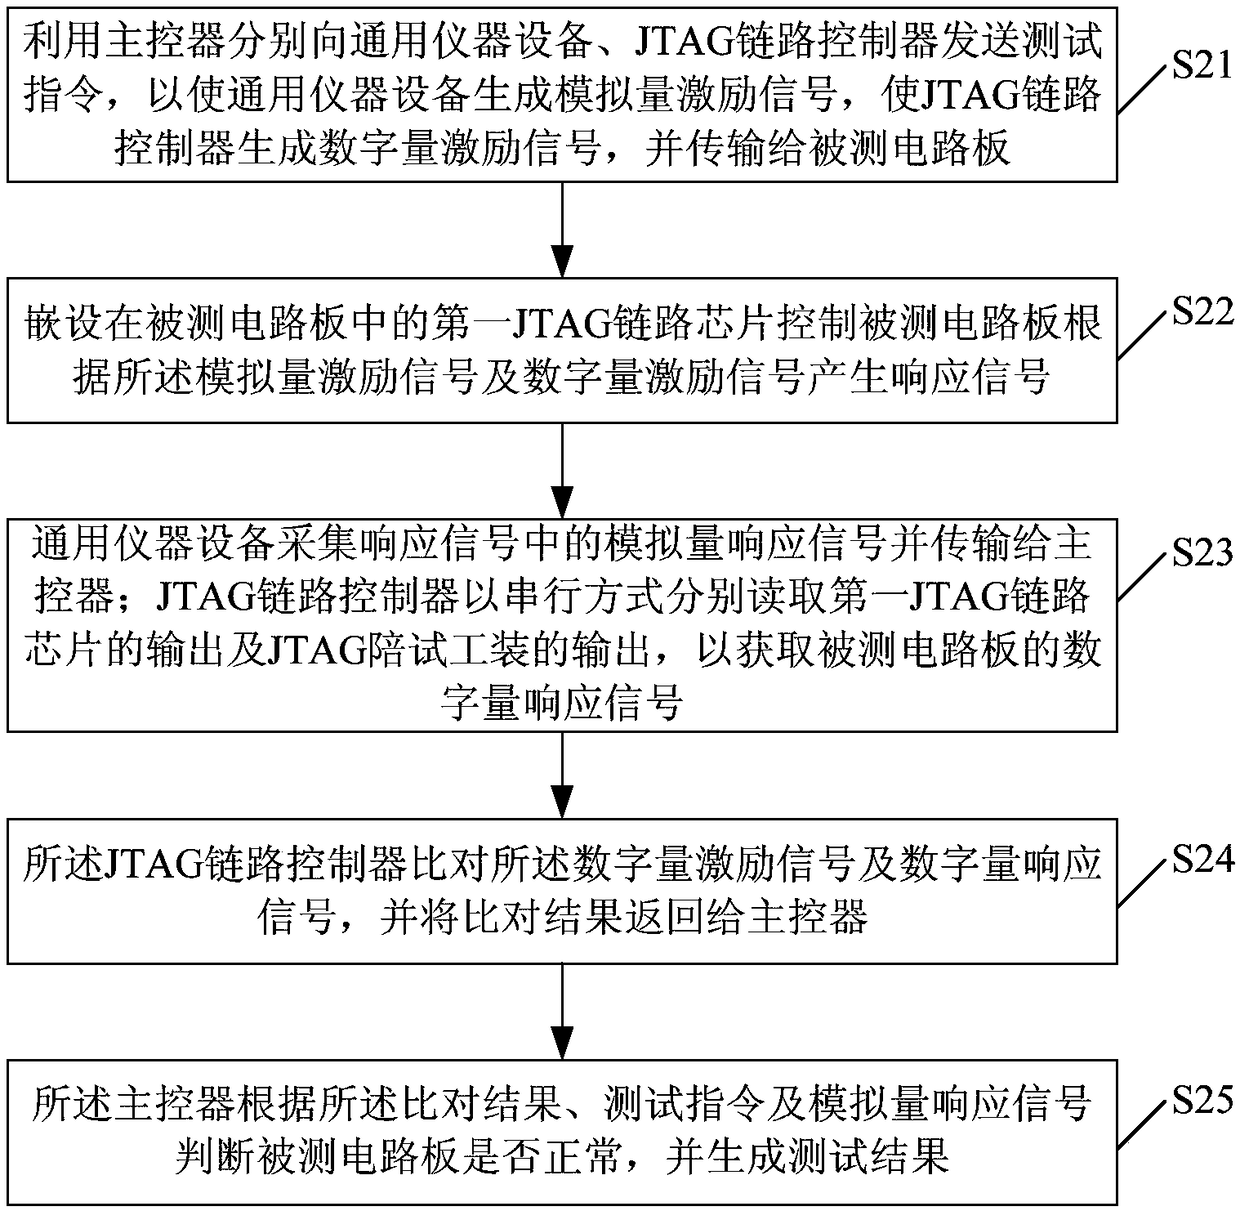 JTAG link based circuit board test system and method